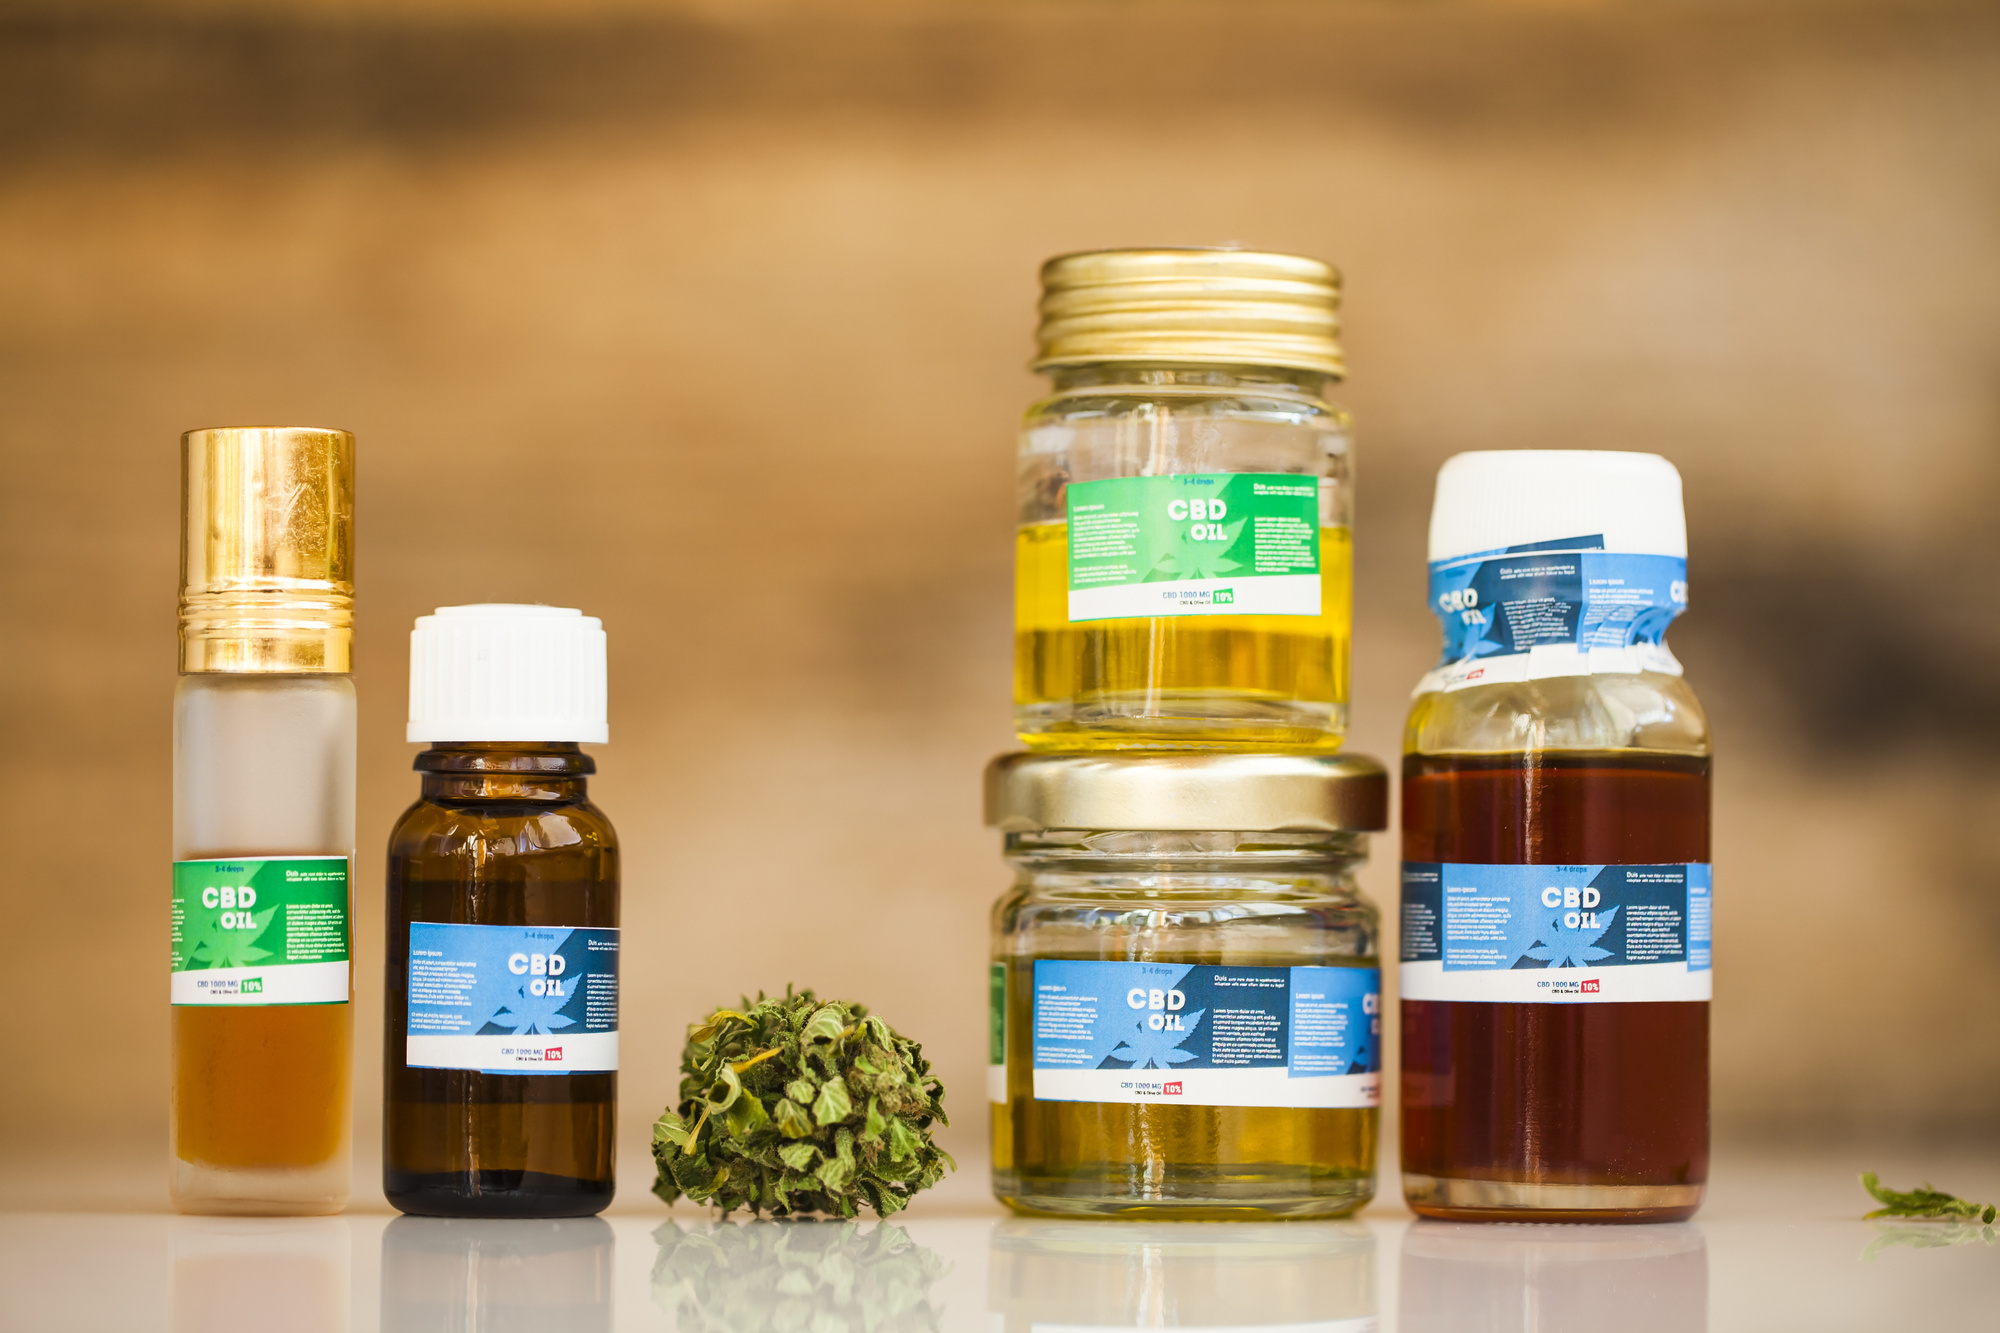 LEARN MORE ABOUT HOW WE CHOOSE OUR FEATURED CBD PRODUCTS